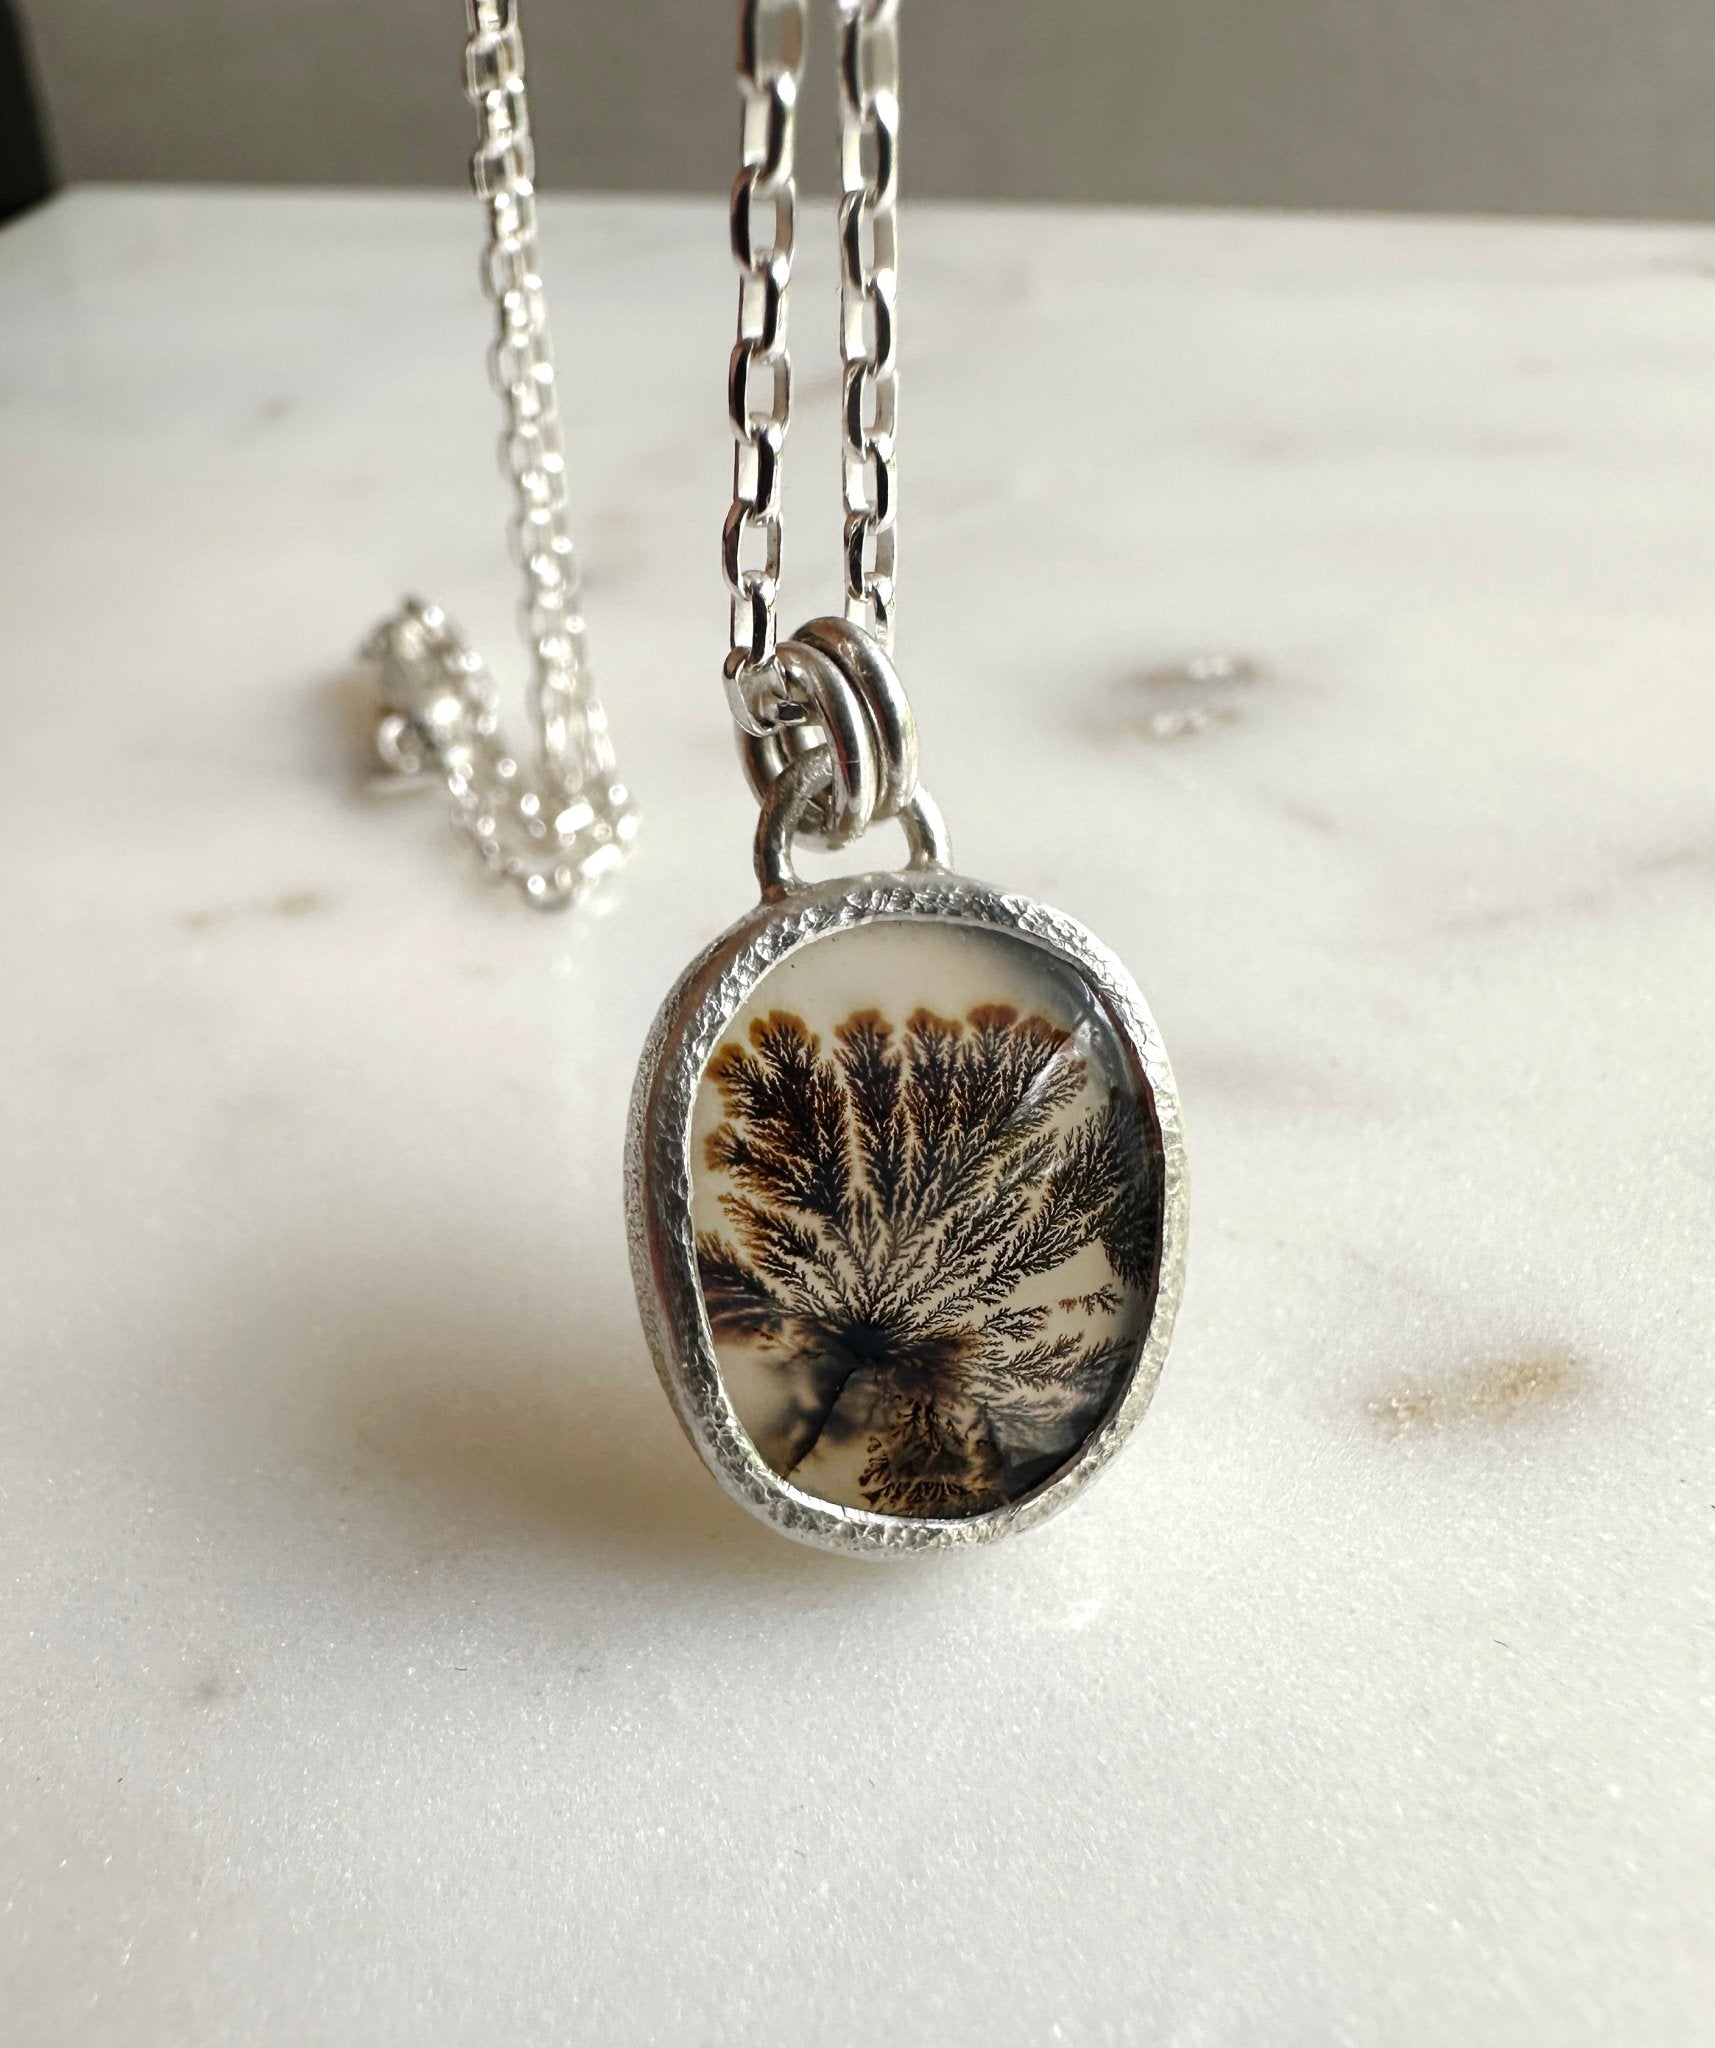 Dendritic Agate Necklace - Bluecave Jewelry